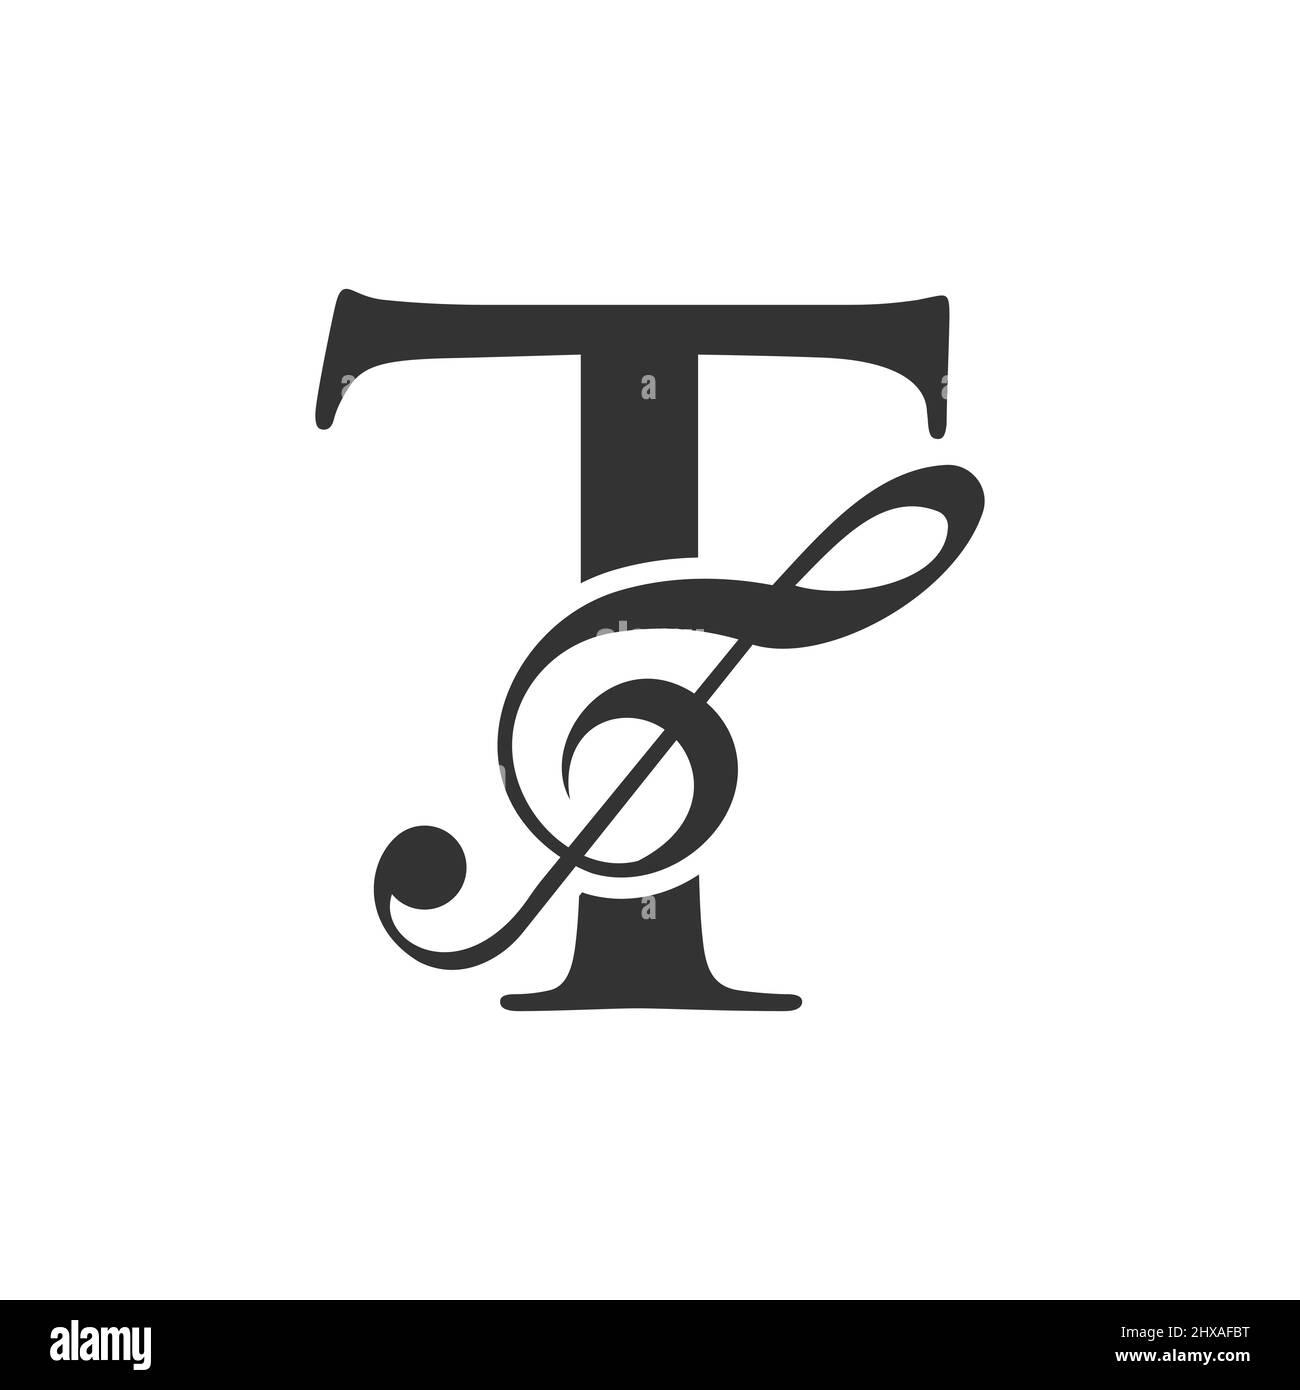 Music Logo On Letter T Concept. T Music Note Sign, Sound Music Melody Template Stock Vector